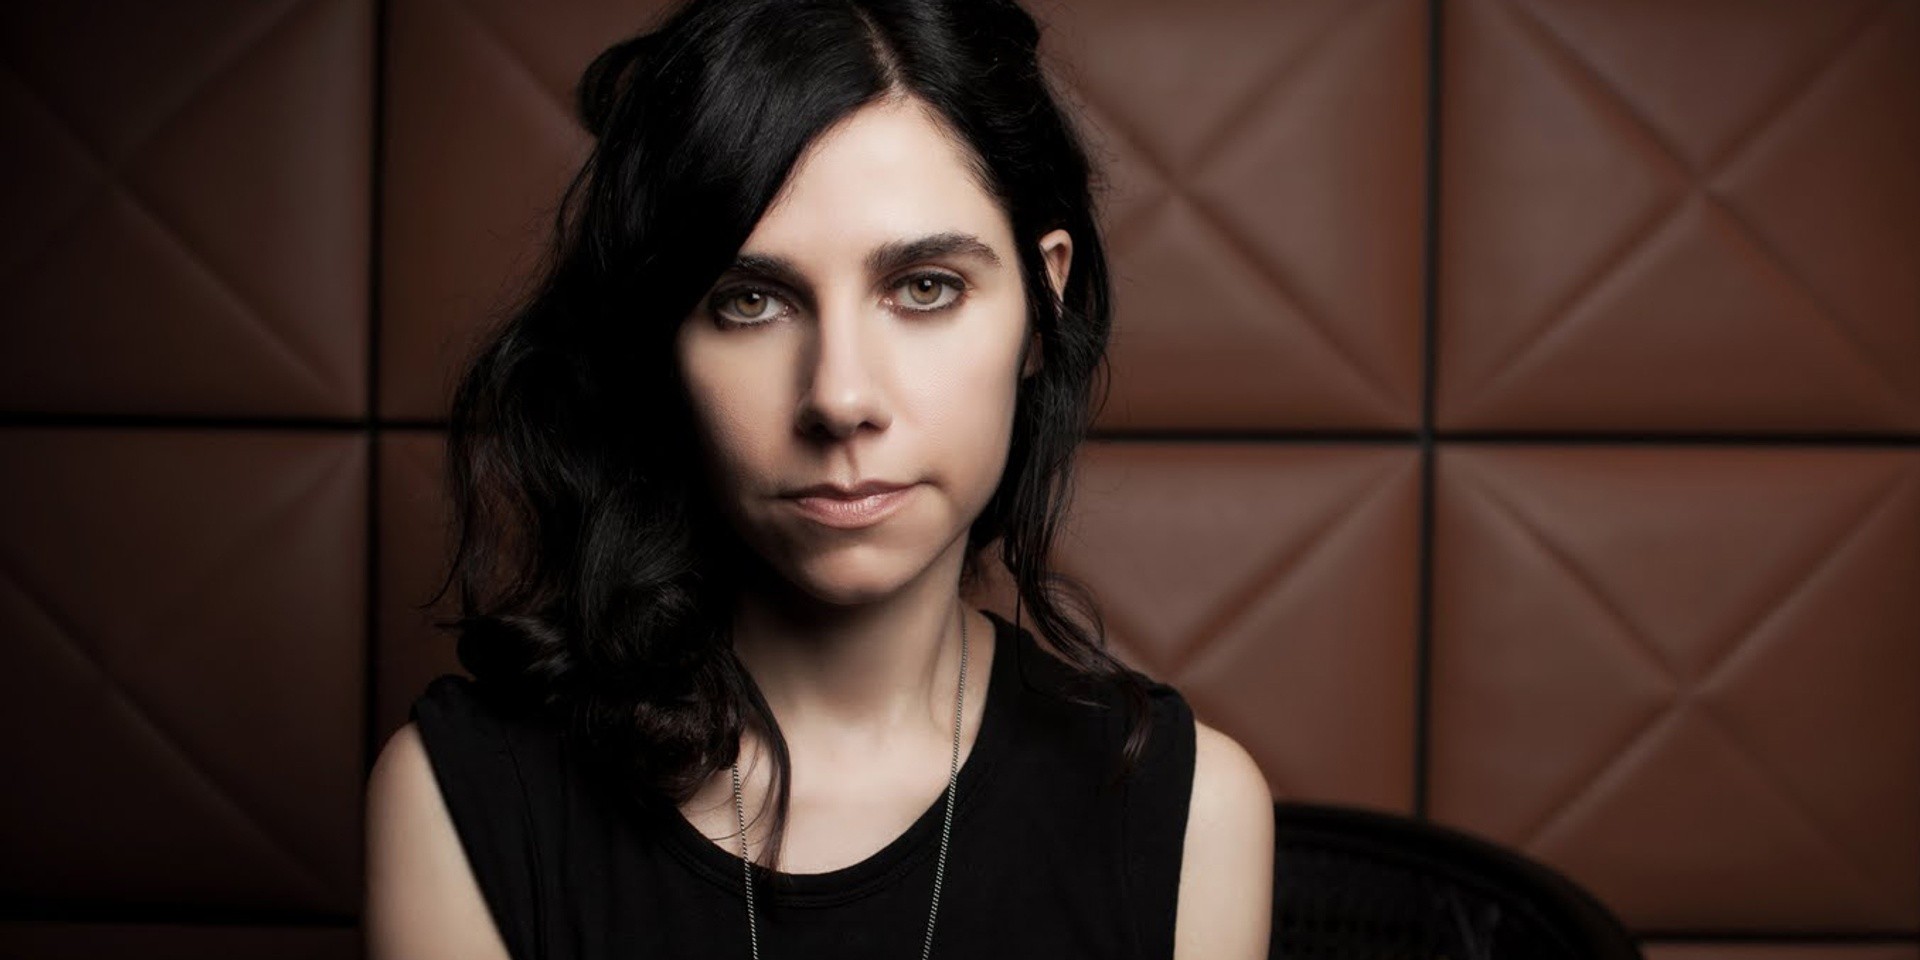 PJ Harvey to perform in Singapore for the first time ever